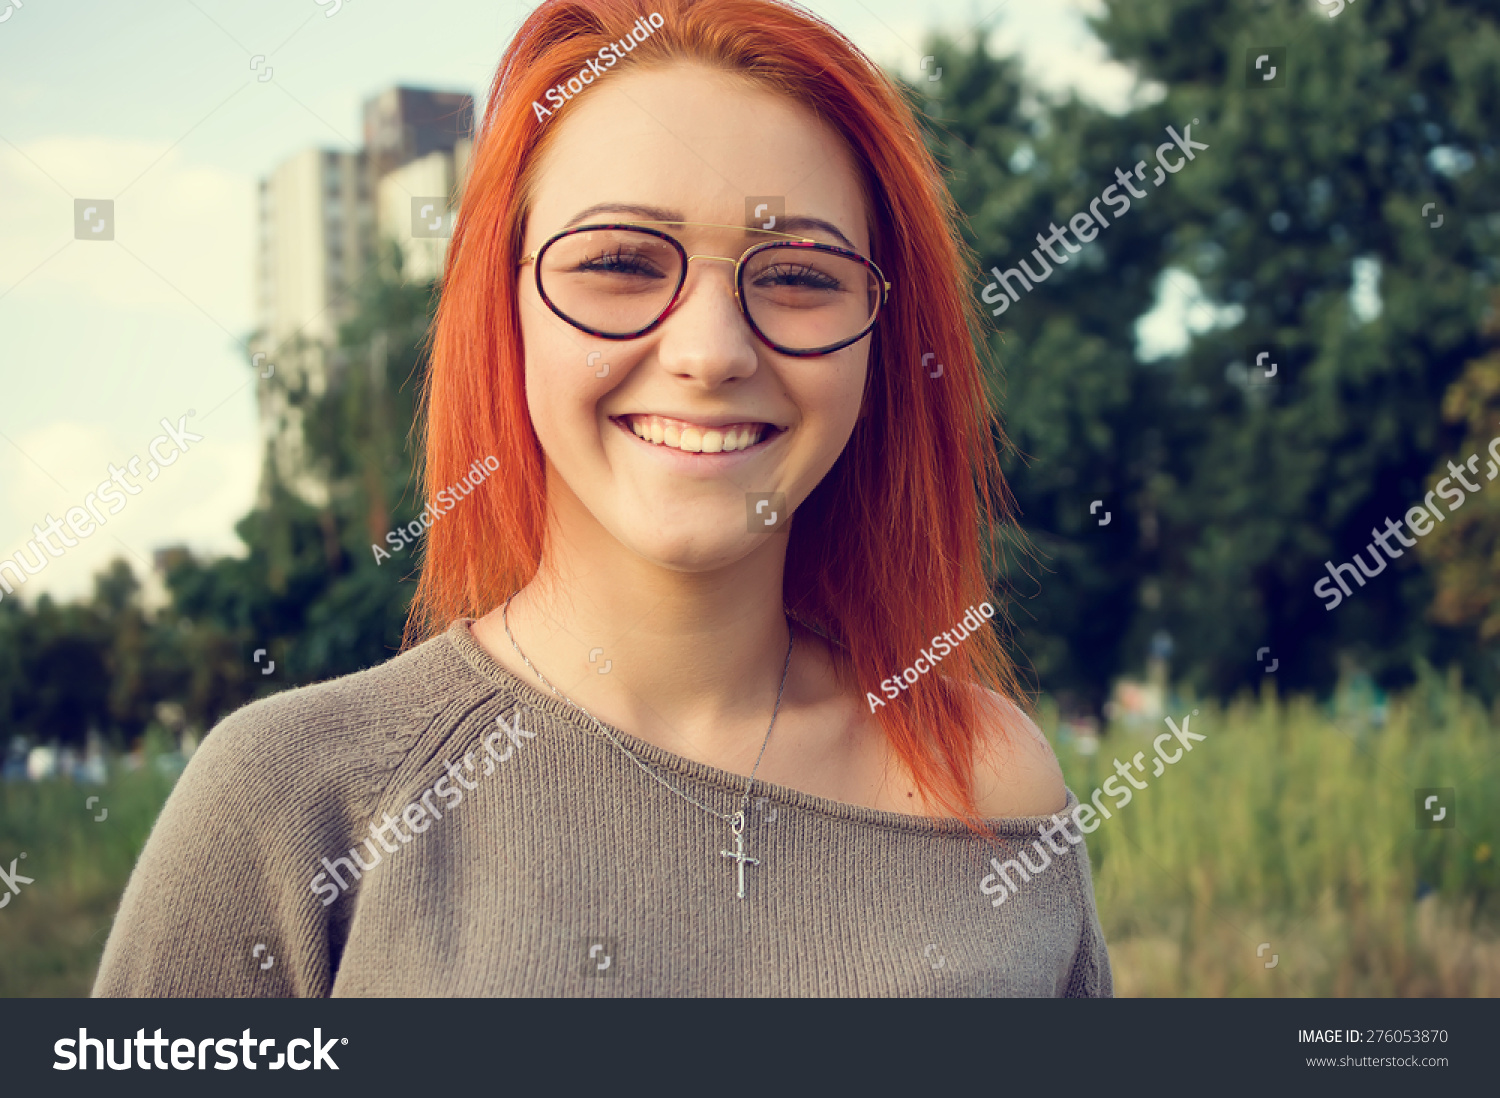 Girl with bright red hair. Woman in glasses. Beautiful happy girl outdoors. Beautiful smile on her face. Girl looks straight ahead at you. woman on the background of sky and green plants. Funny face. #276053870